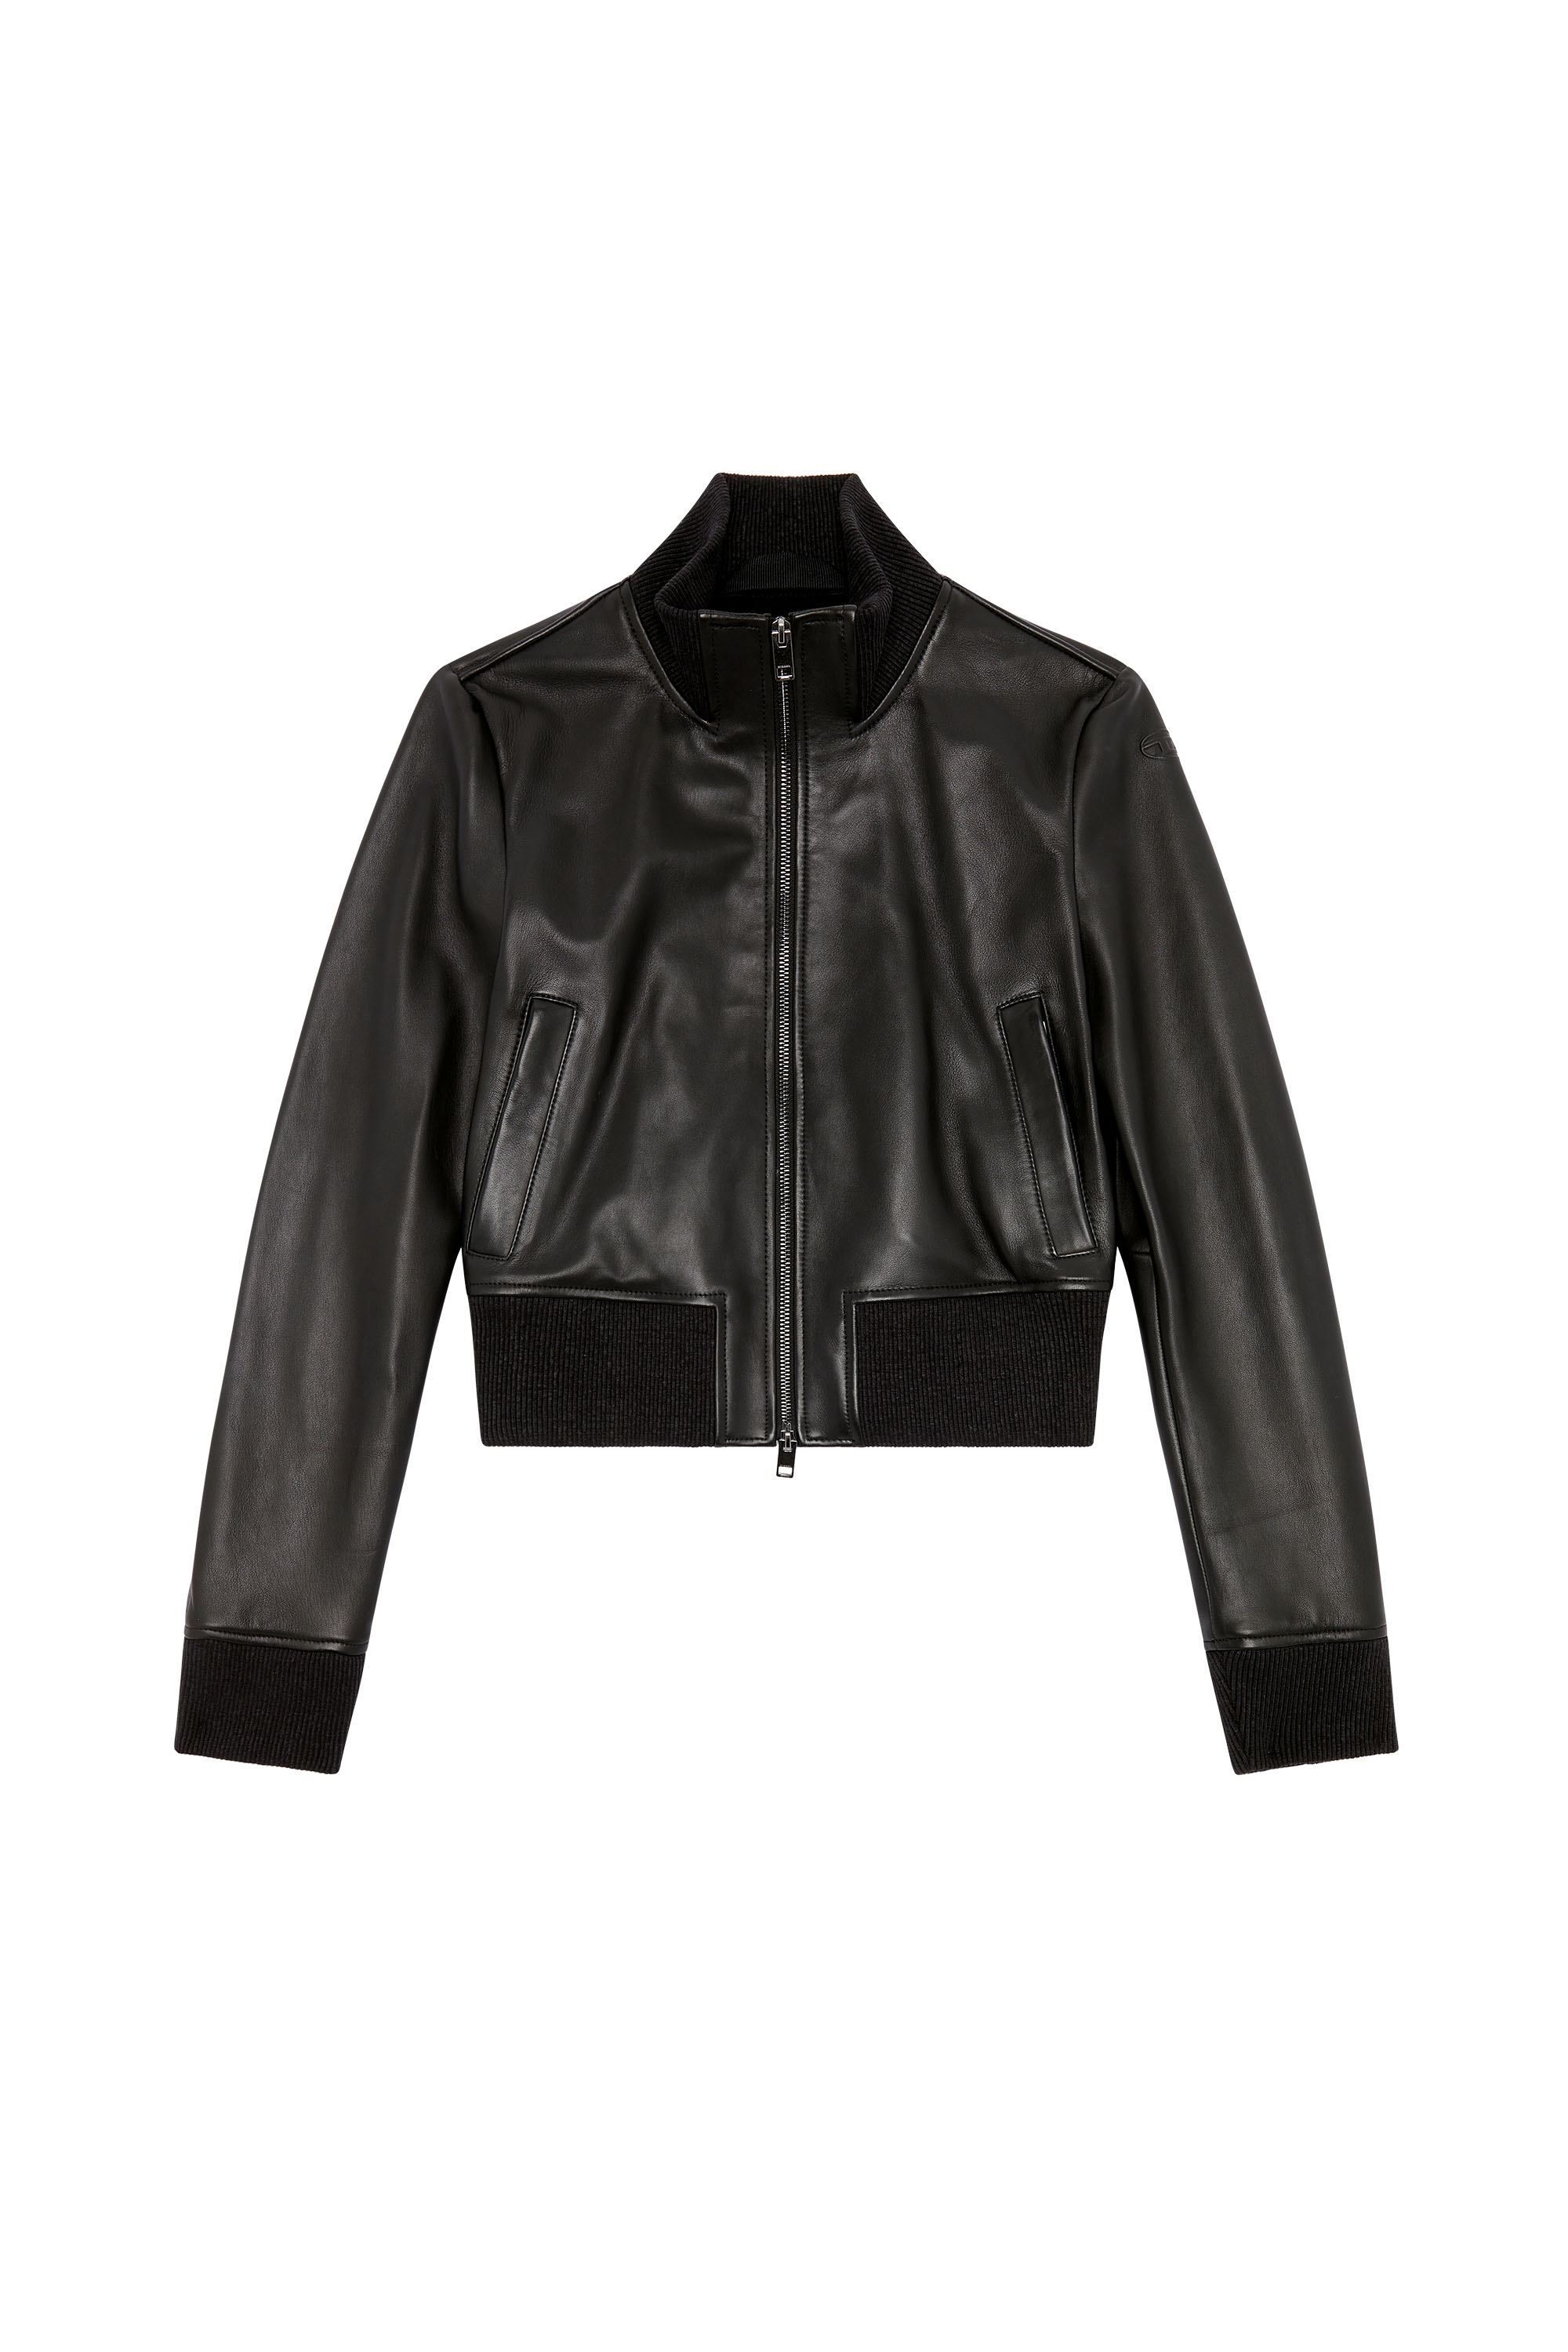 EACH X OTHER Logo-embossed leather jacket